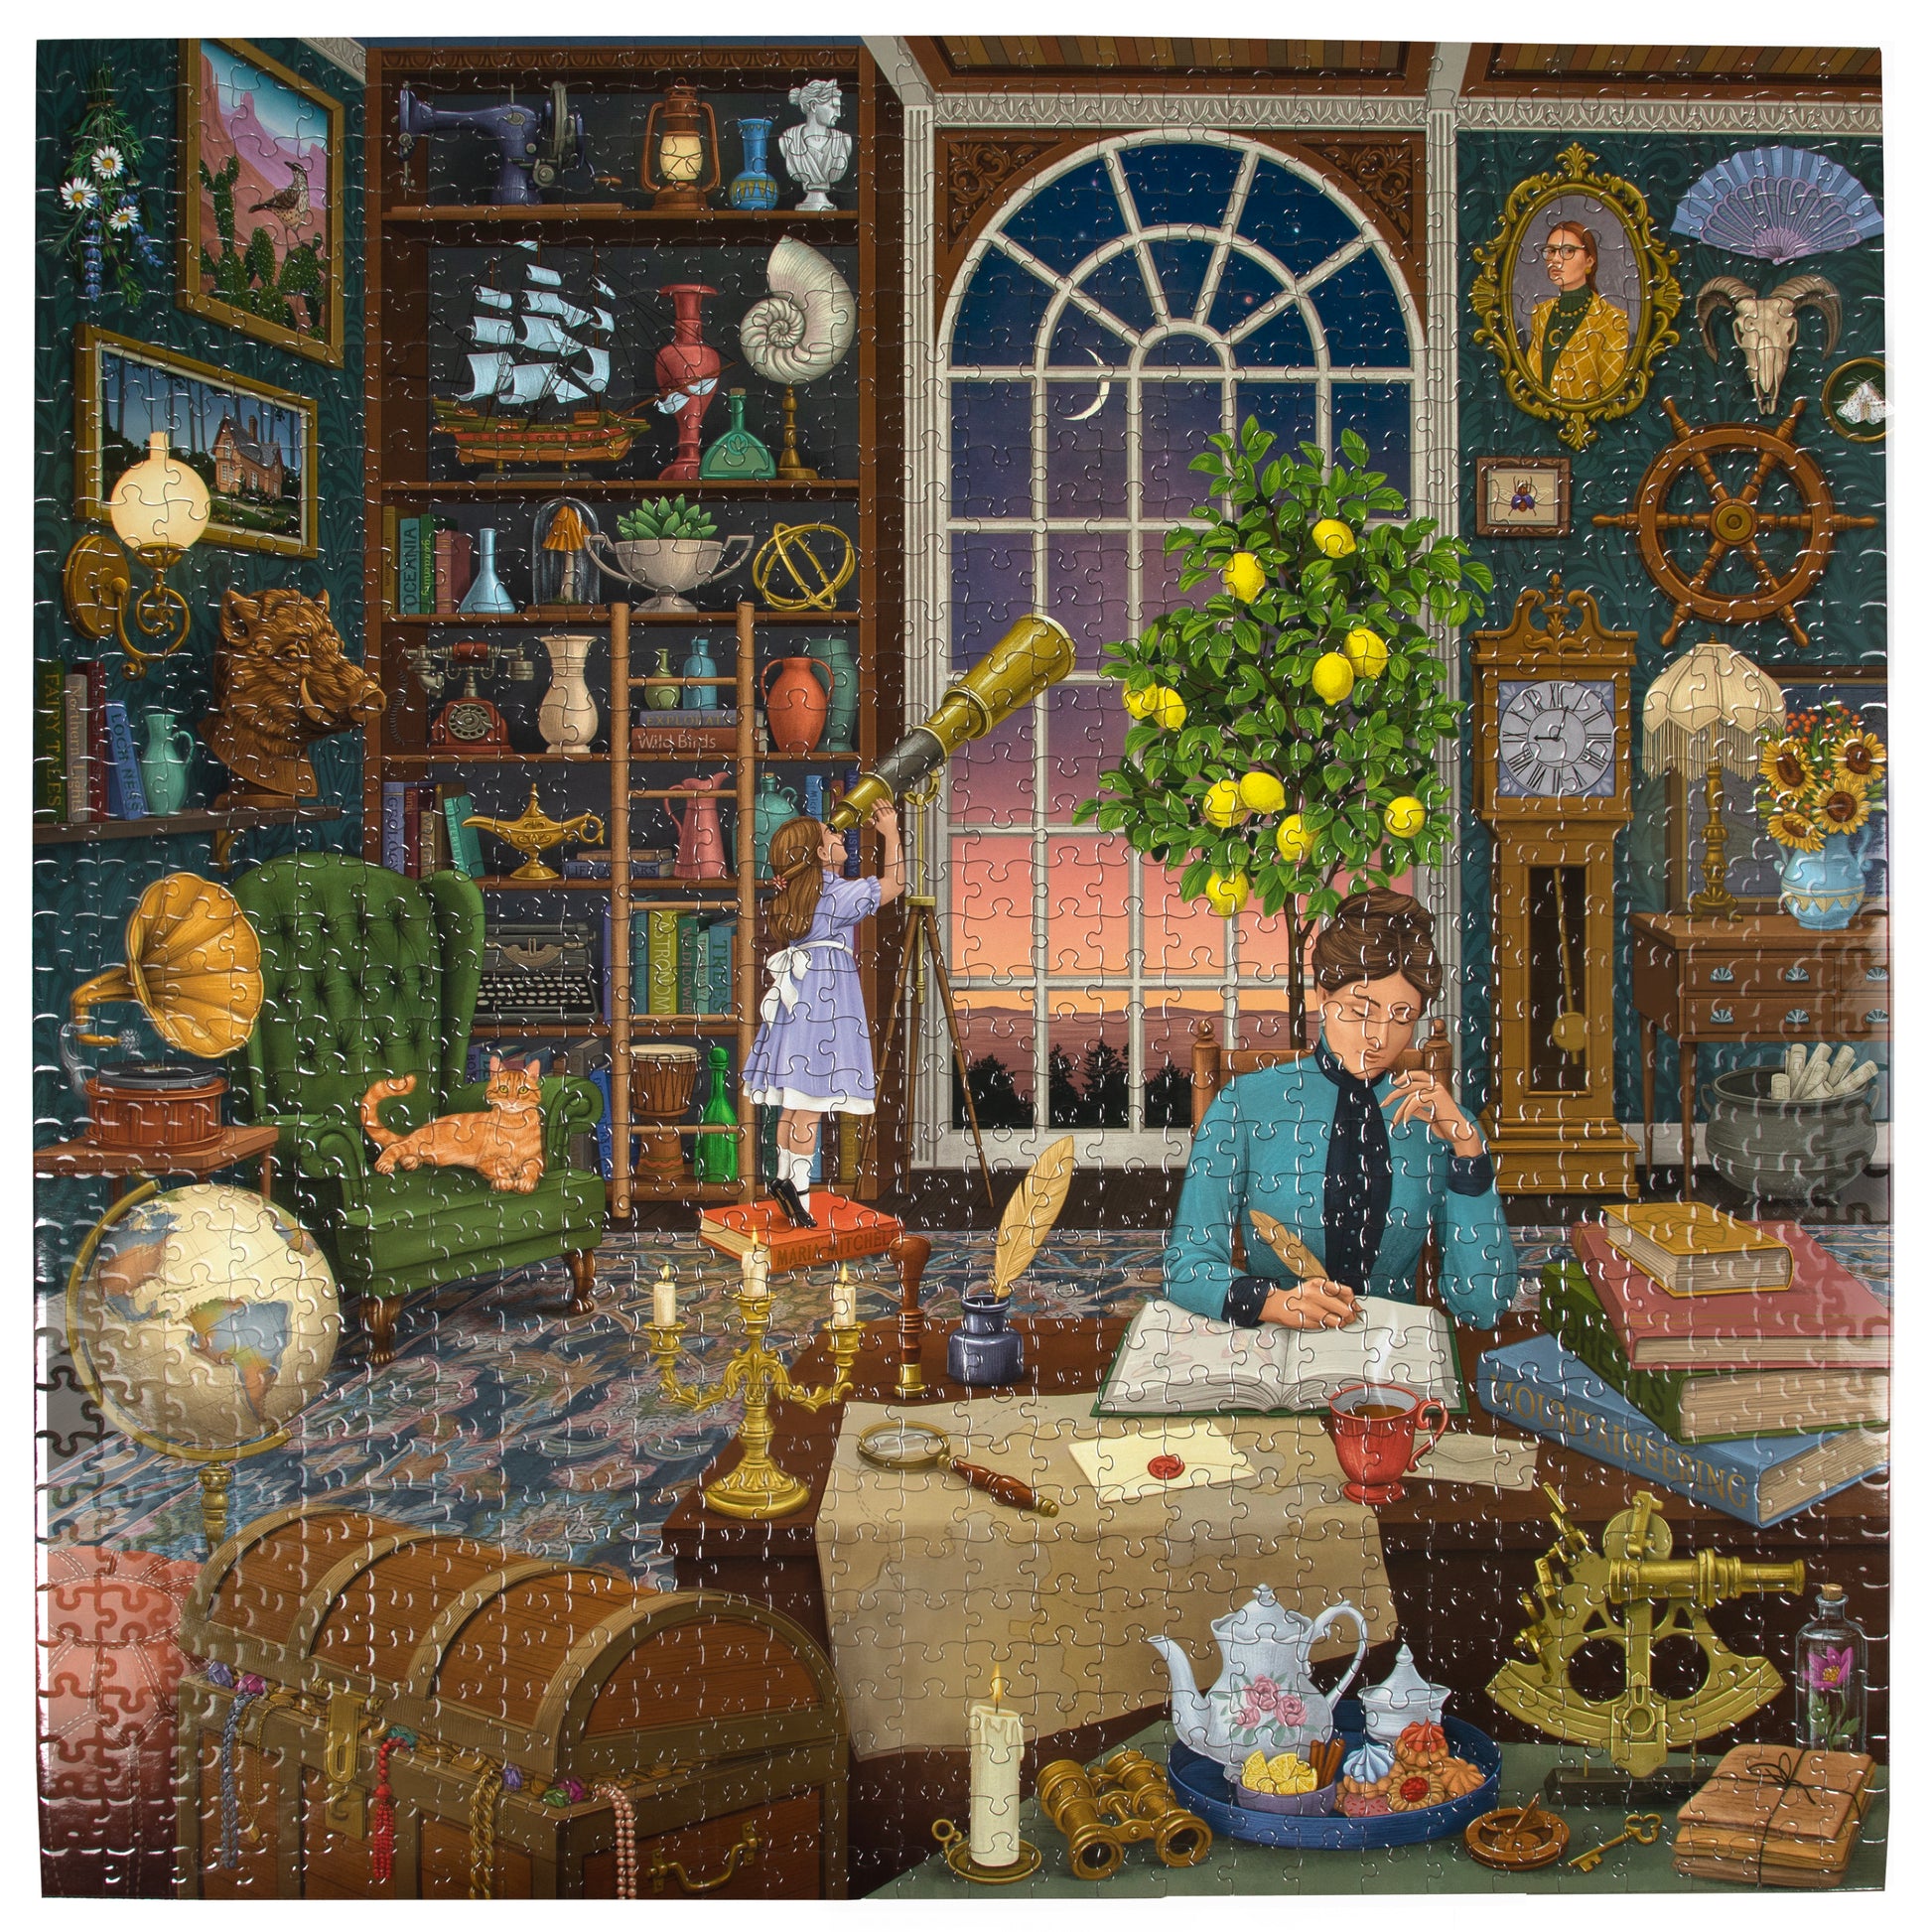 The Library Jigsaw Puzzle